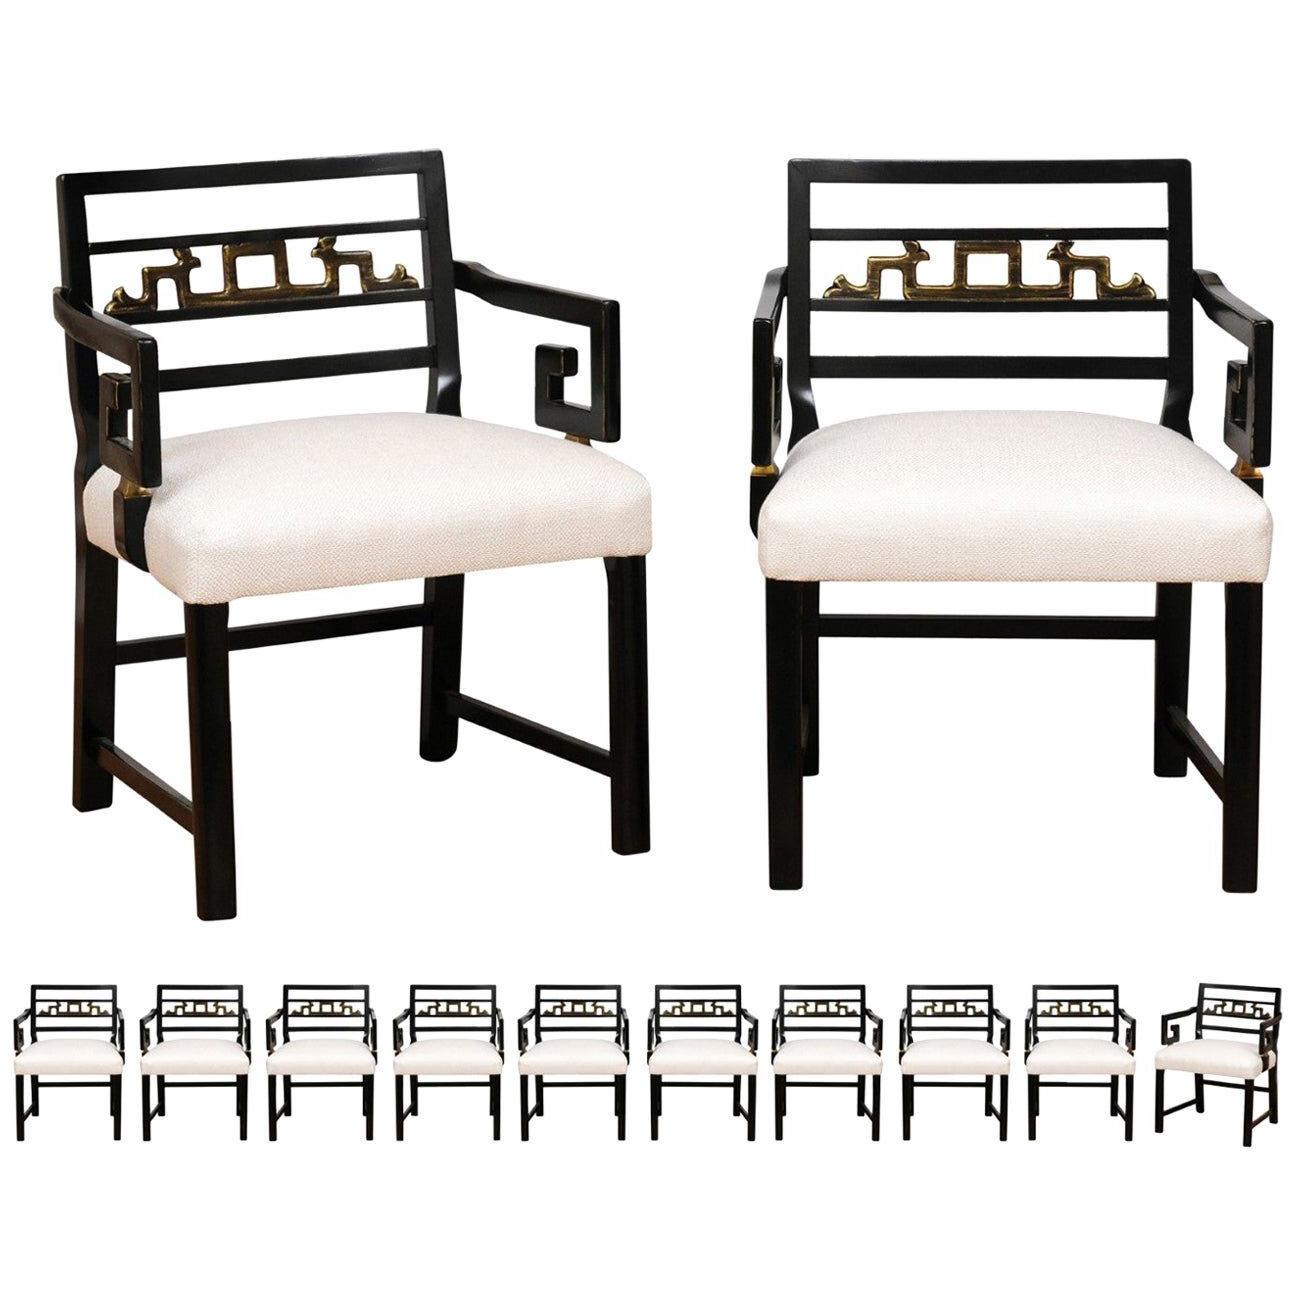 Exquisite Set of 12 Chinoiserie Greek Key Armchairs by Baker, circa 1960